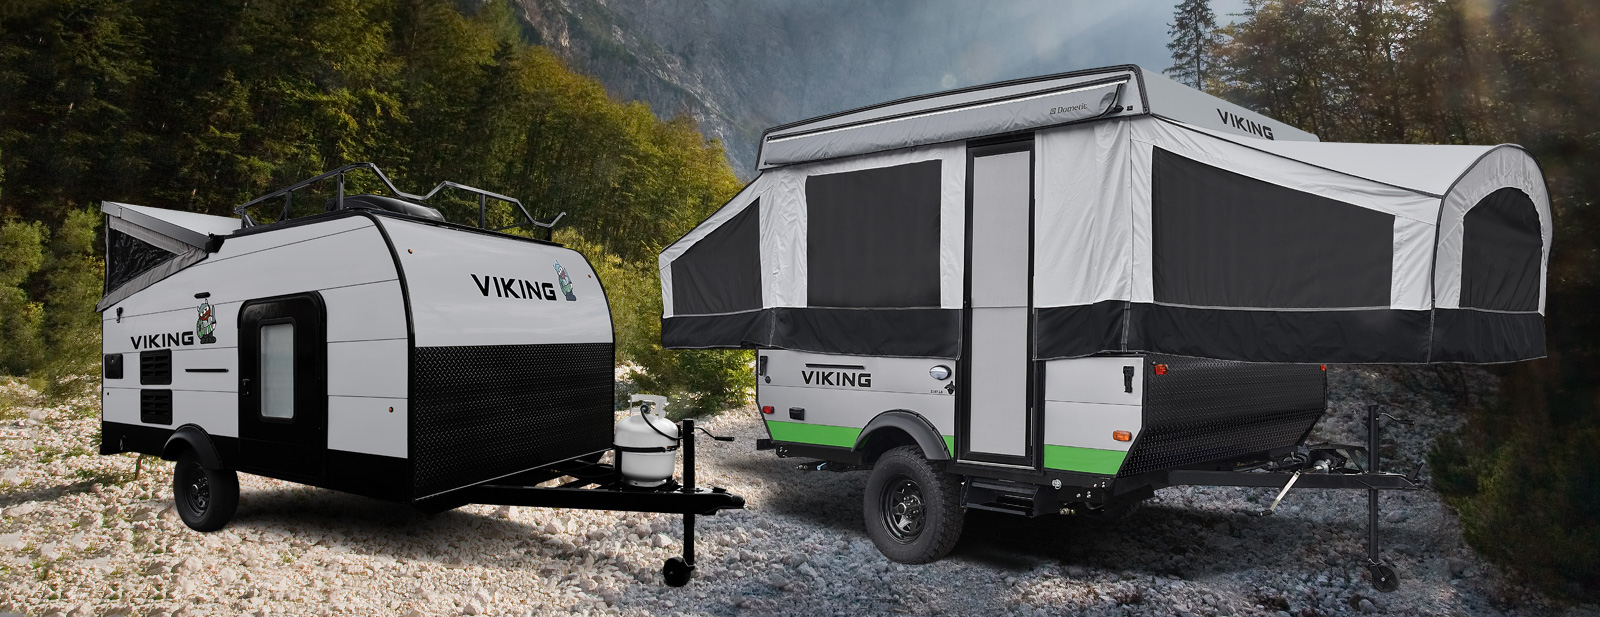 Viking Pop Up Campers By Coachmen Rv,Banana Flower Food